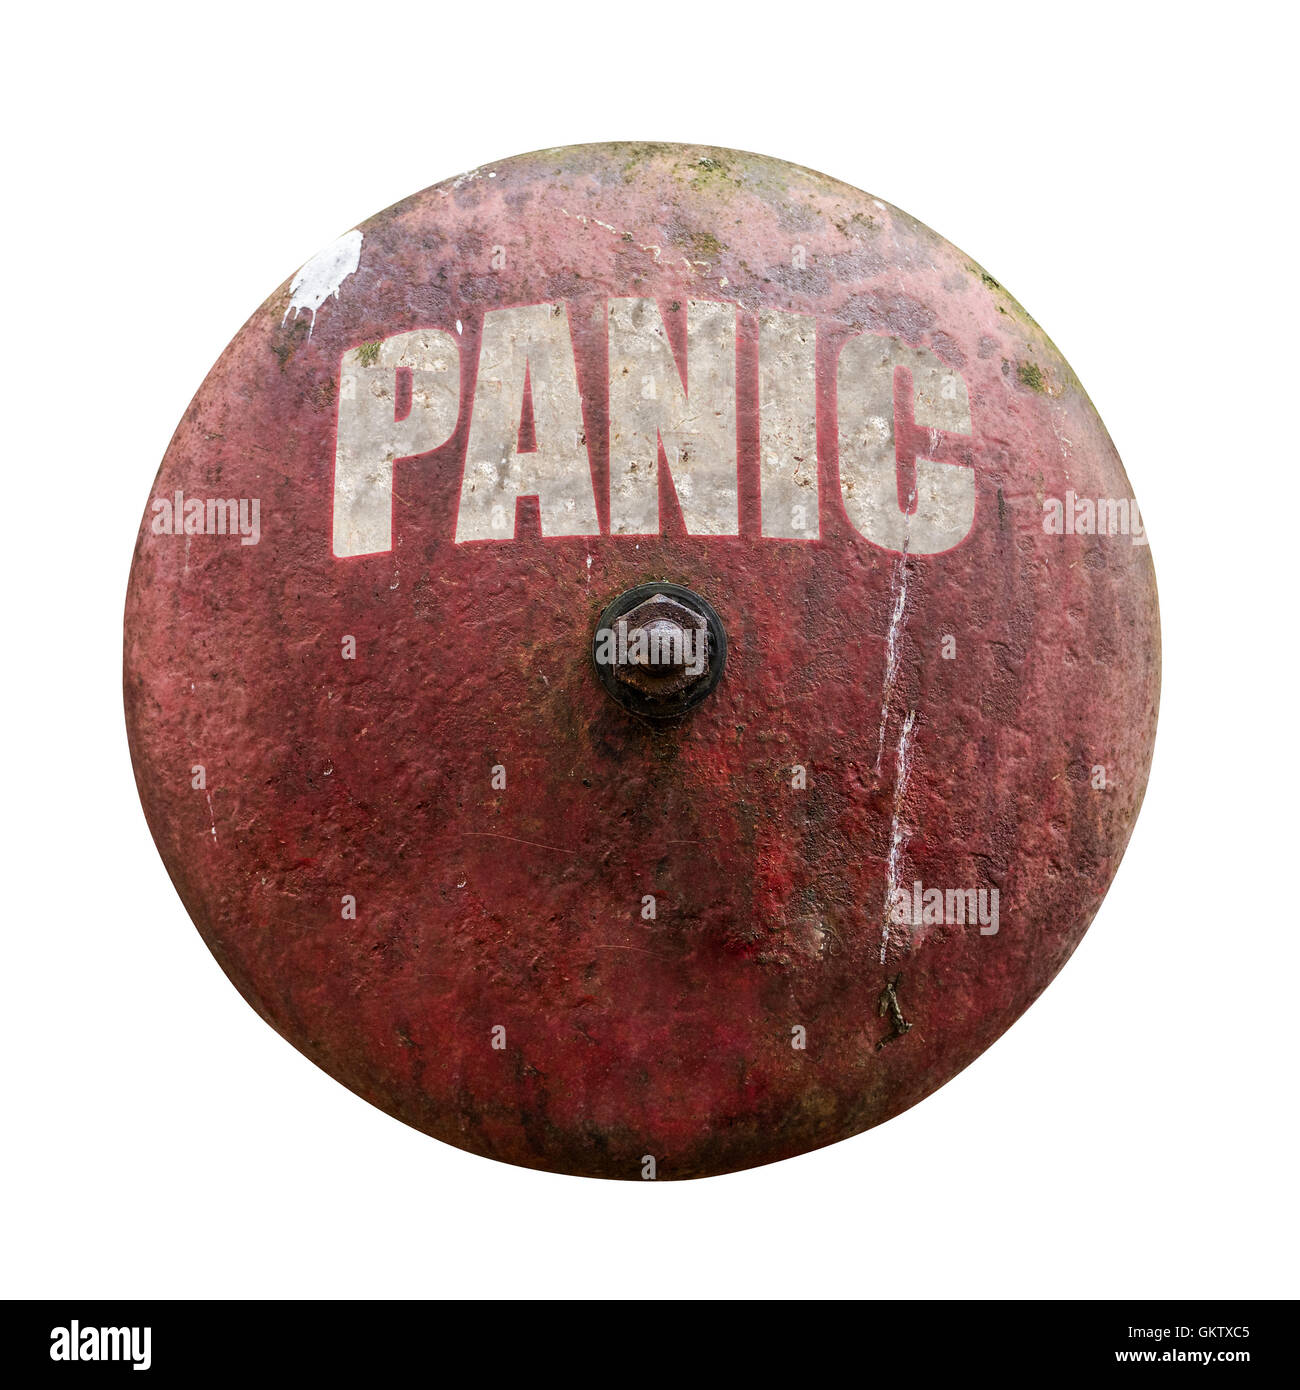 Rustic Vintage Red Alarm Bell With The Word Panic In White Stock Photo